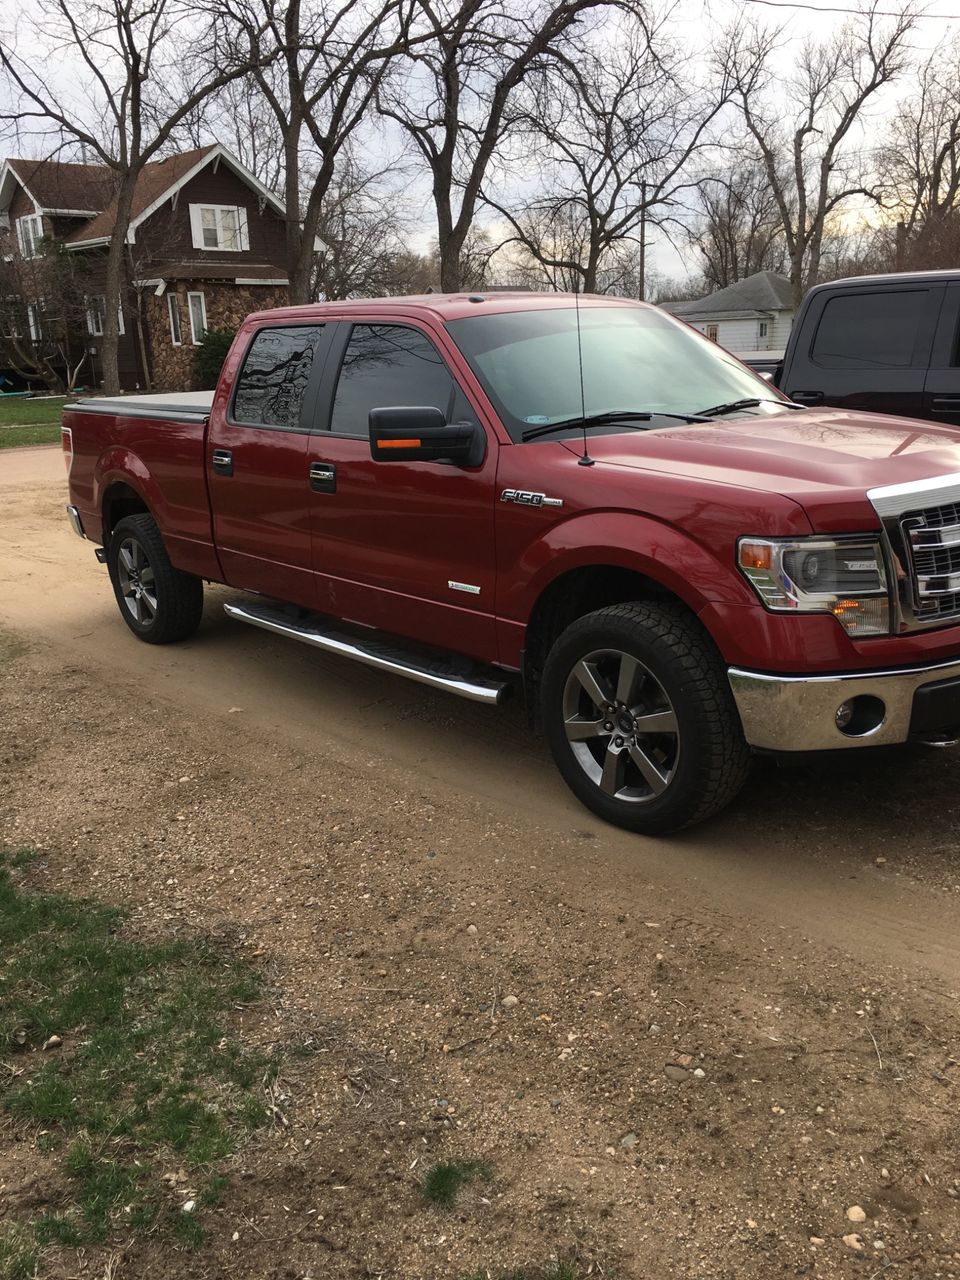 2014 Ford F-150 XLT | Lennox, SD, Ruby Red Metallic Tinted Clear Coat (Red & Orange), 4x4